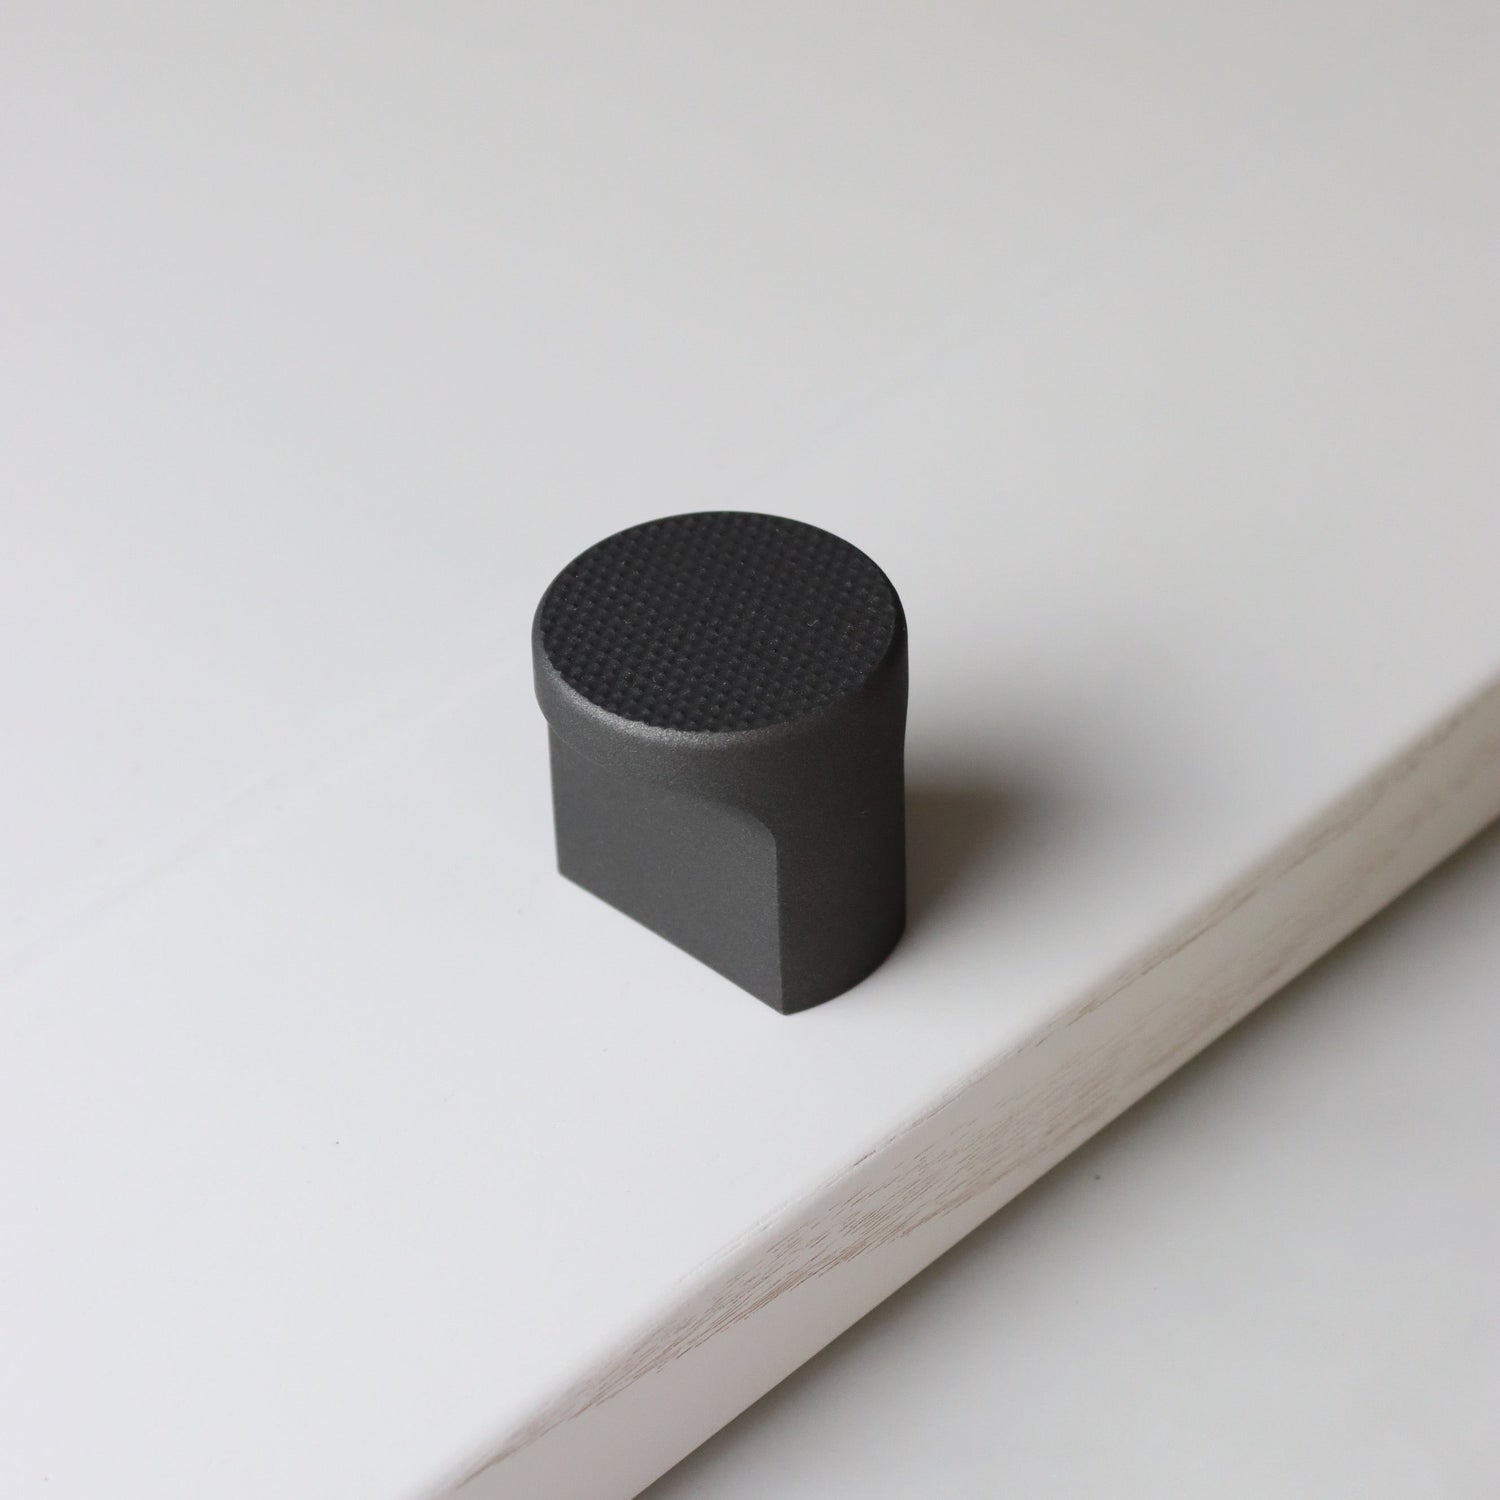 boscastle double finger pull knob for kitchen cabinetry with flat knurl in cerakote ceramic tungsten - herbert direct. lords builders merchants. martin moore manchester